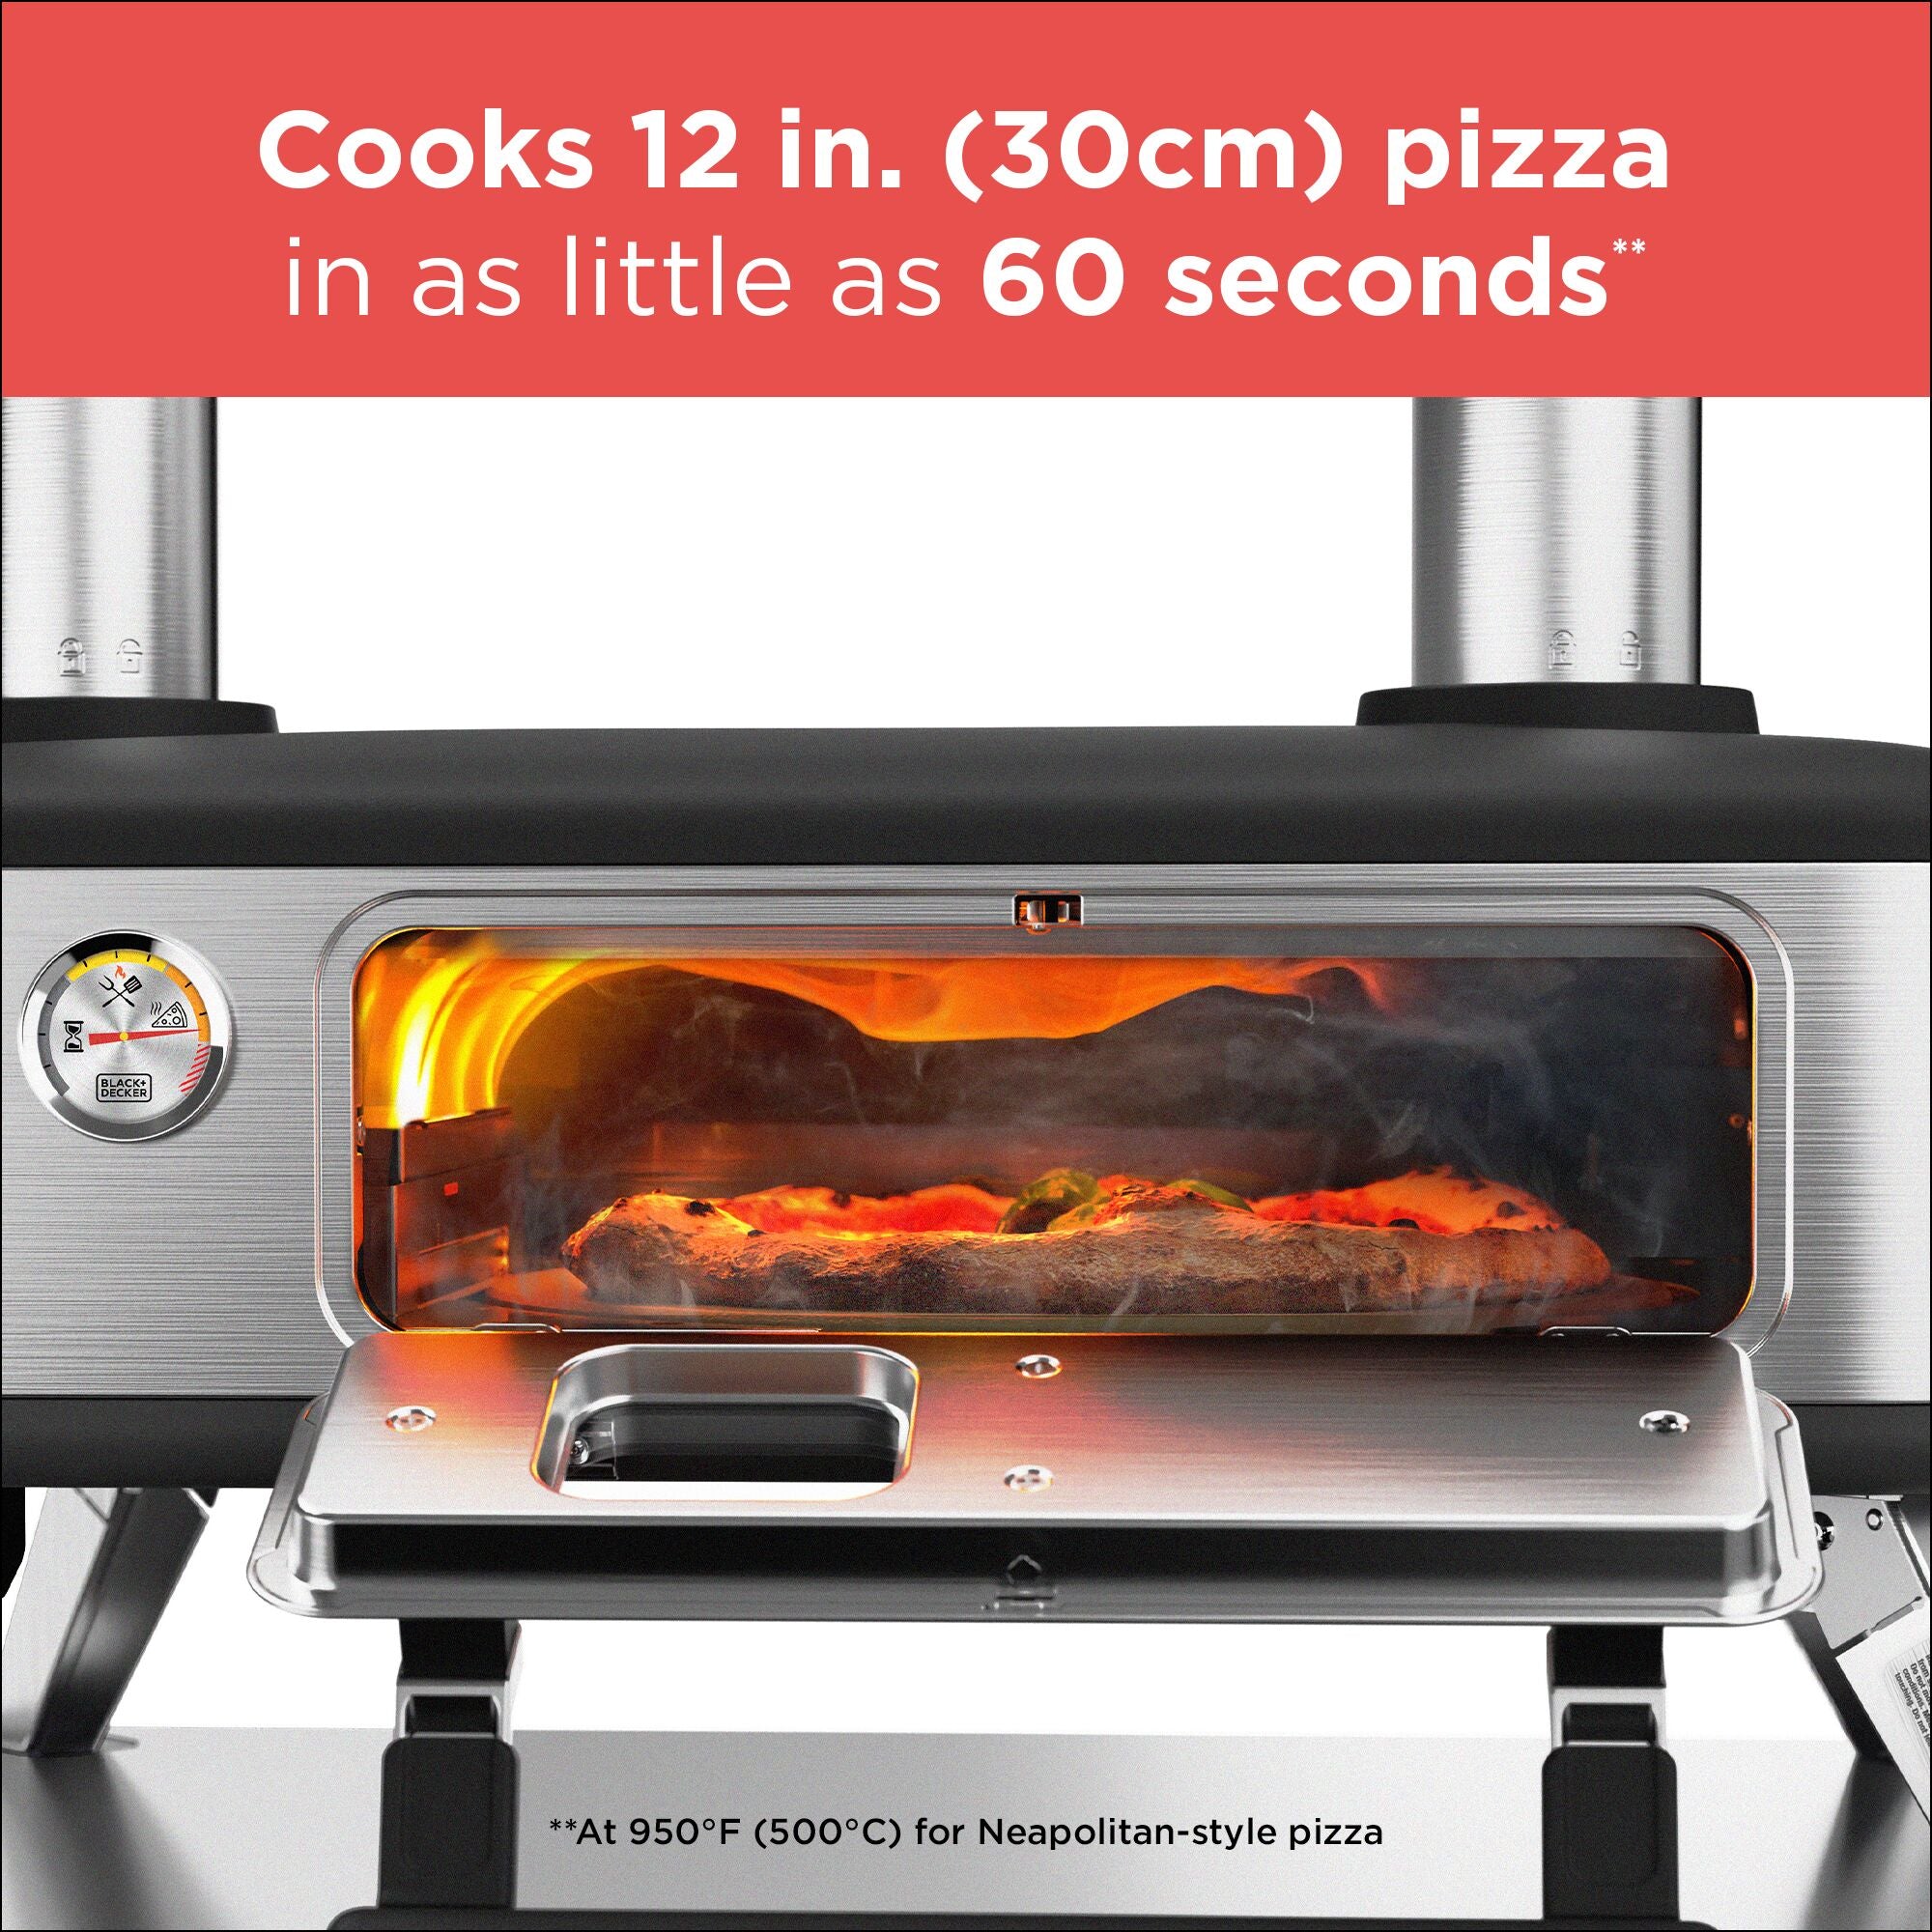 Cooks a 12 in. pizza in as little as 60 seconds